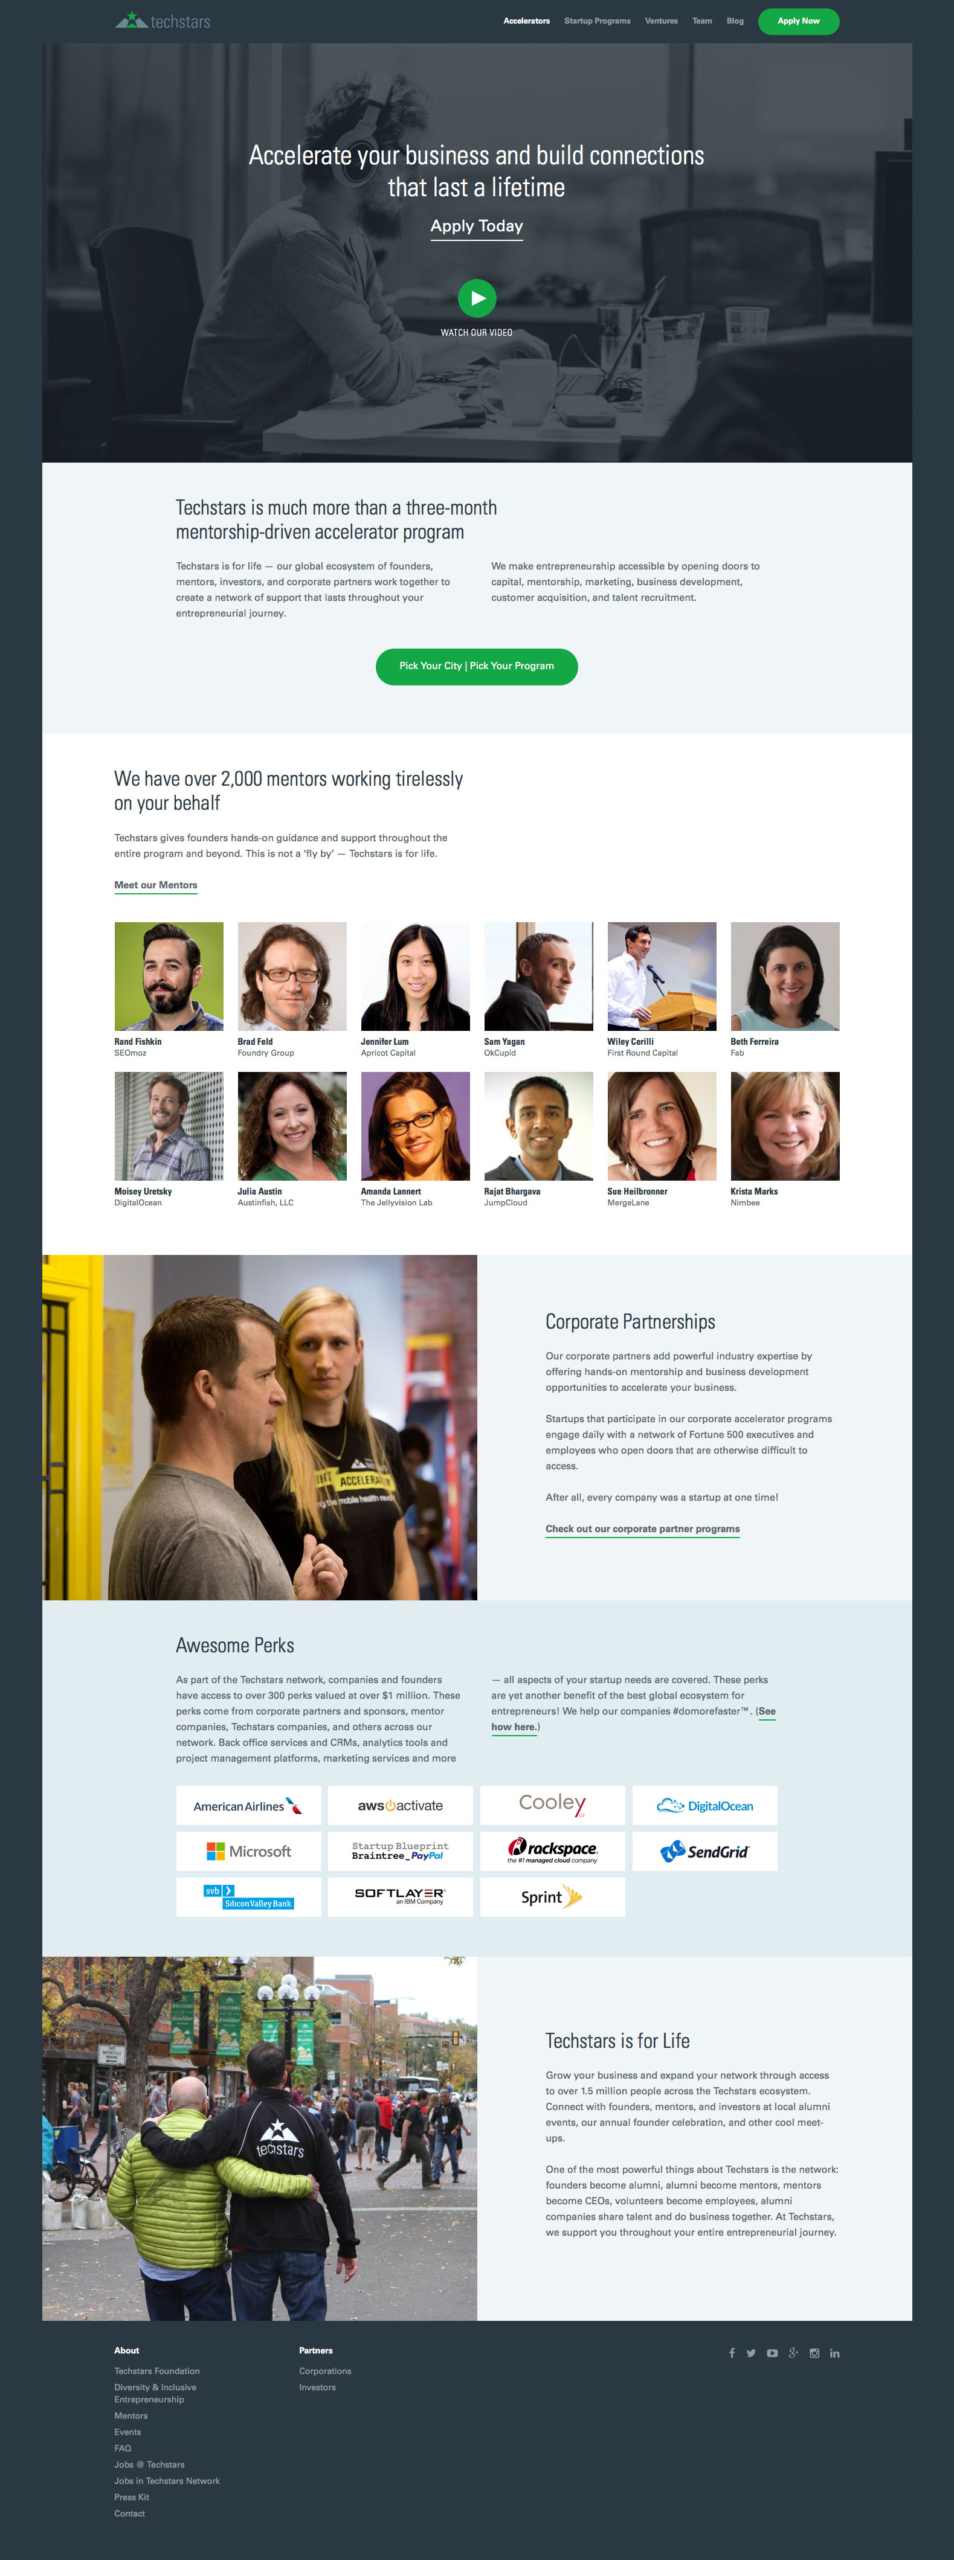 Techstars website designed and developed by Heavy Heavy